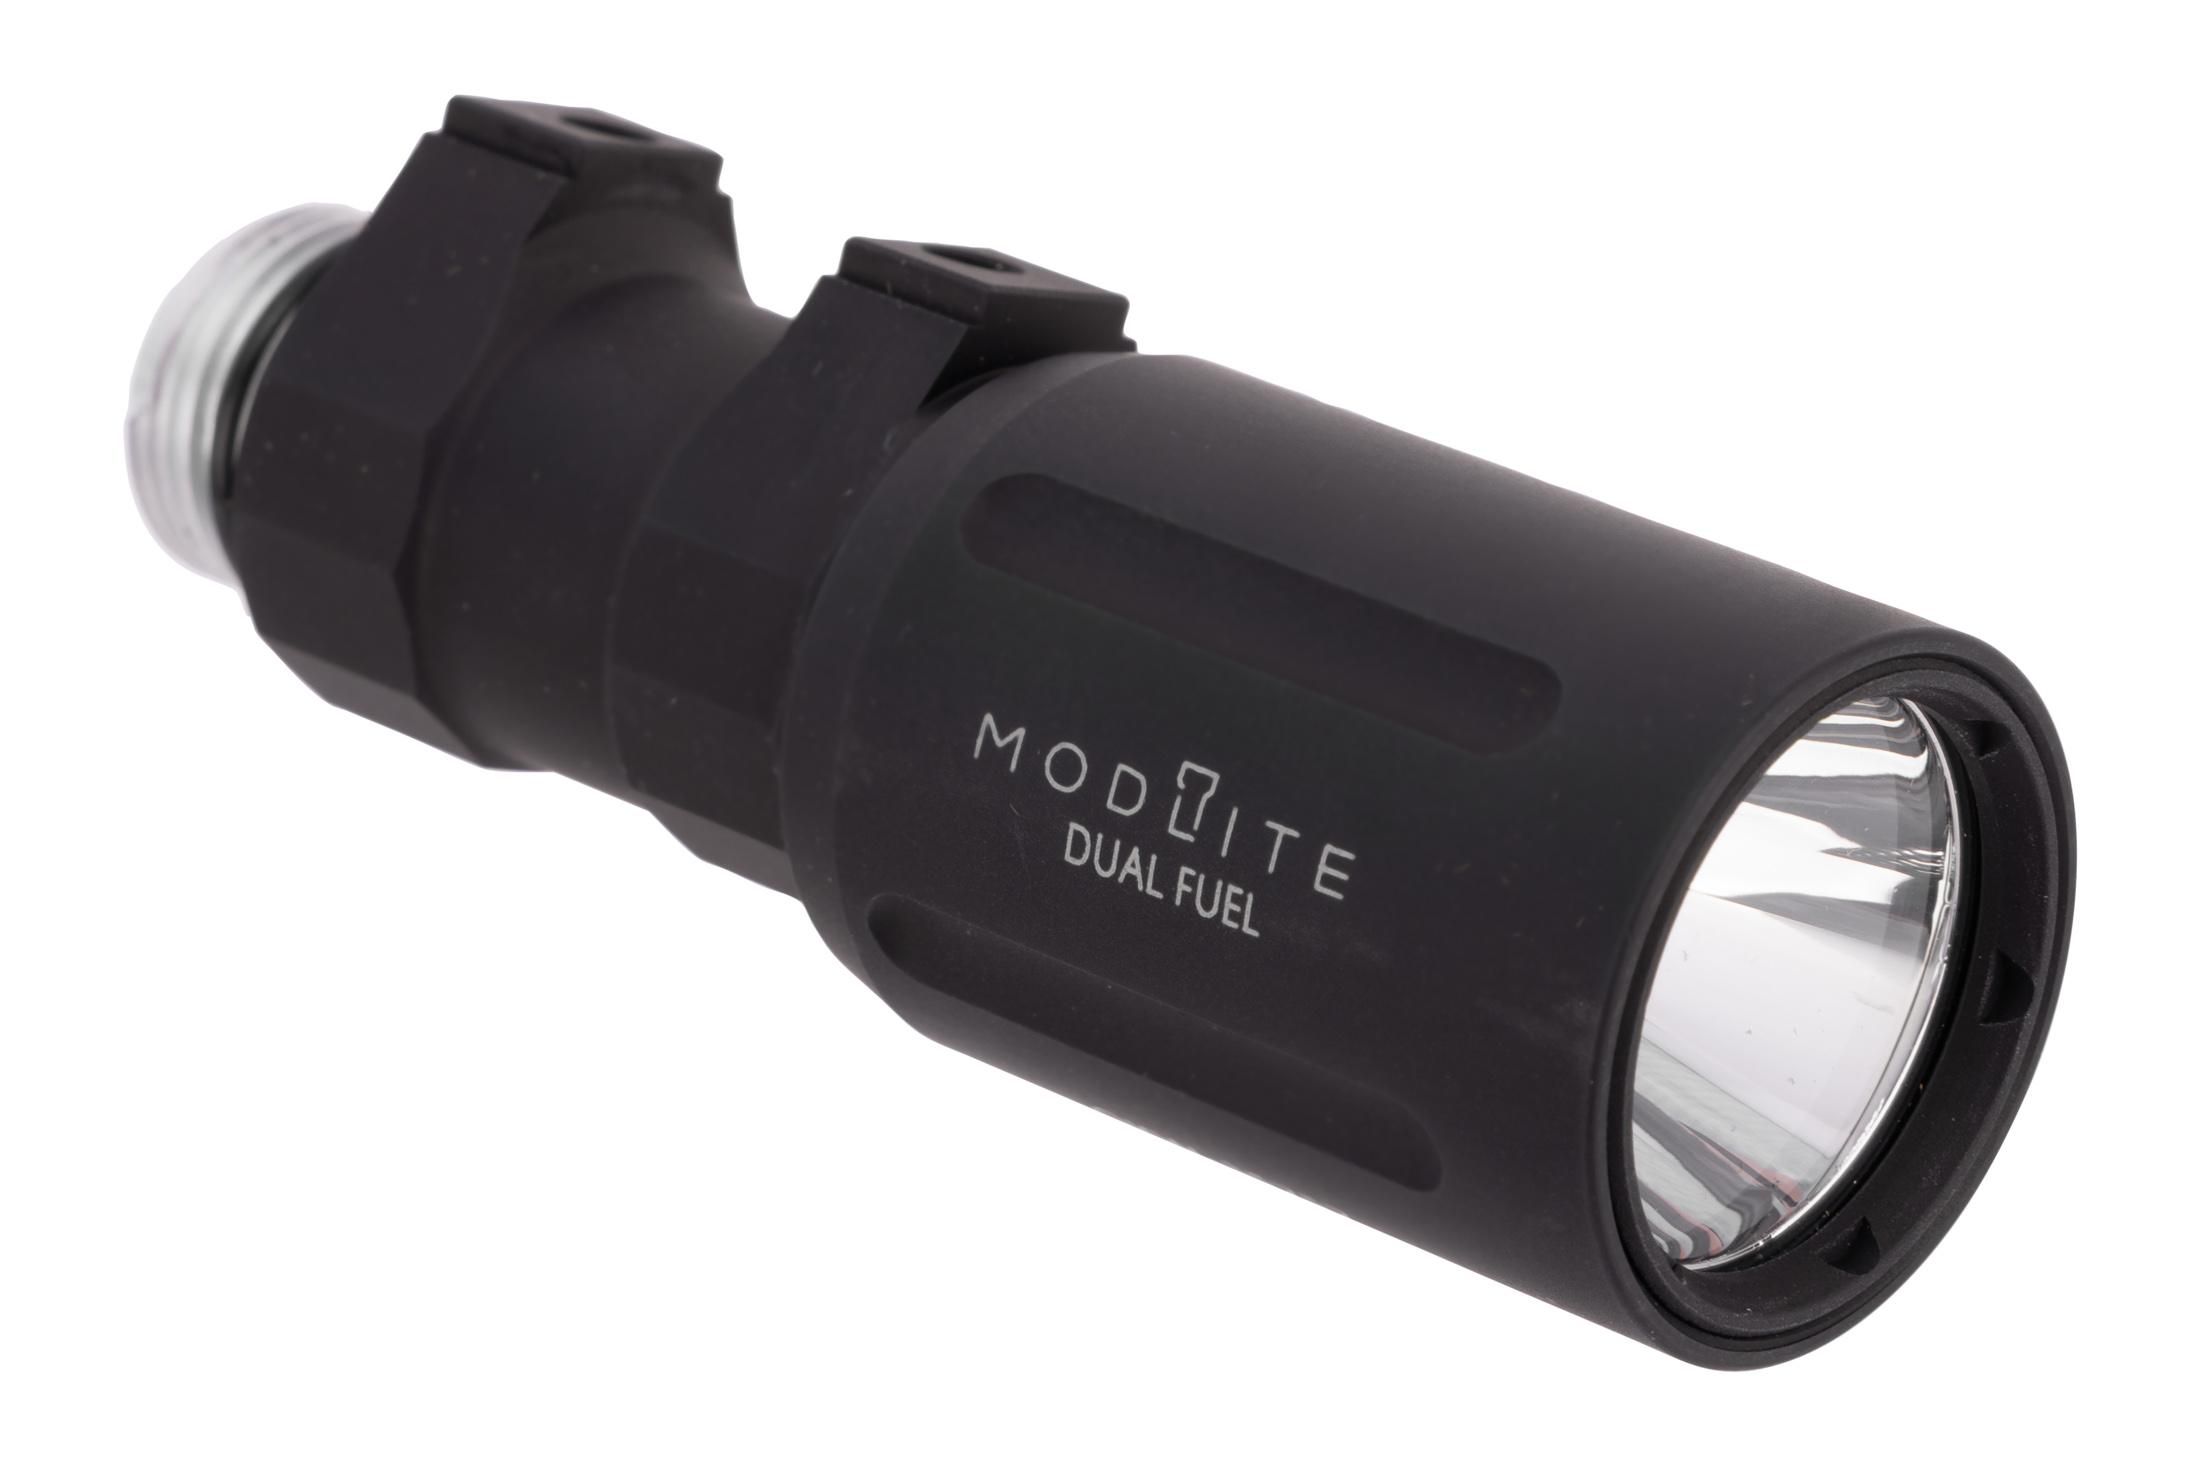 Modlite PL350 OKW Weapon Mounted Light - No Tailcap or Charger - Black